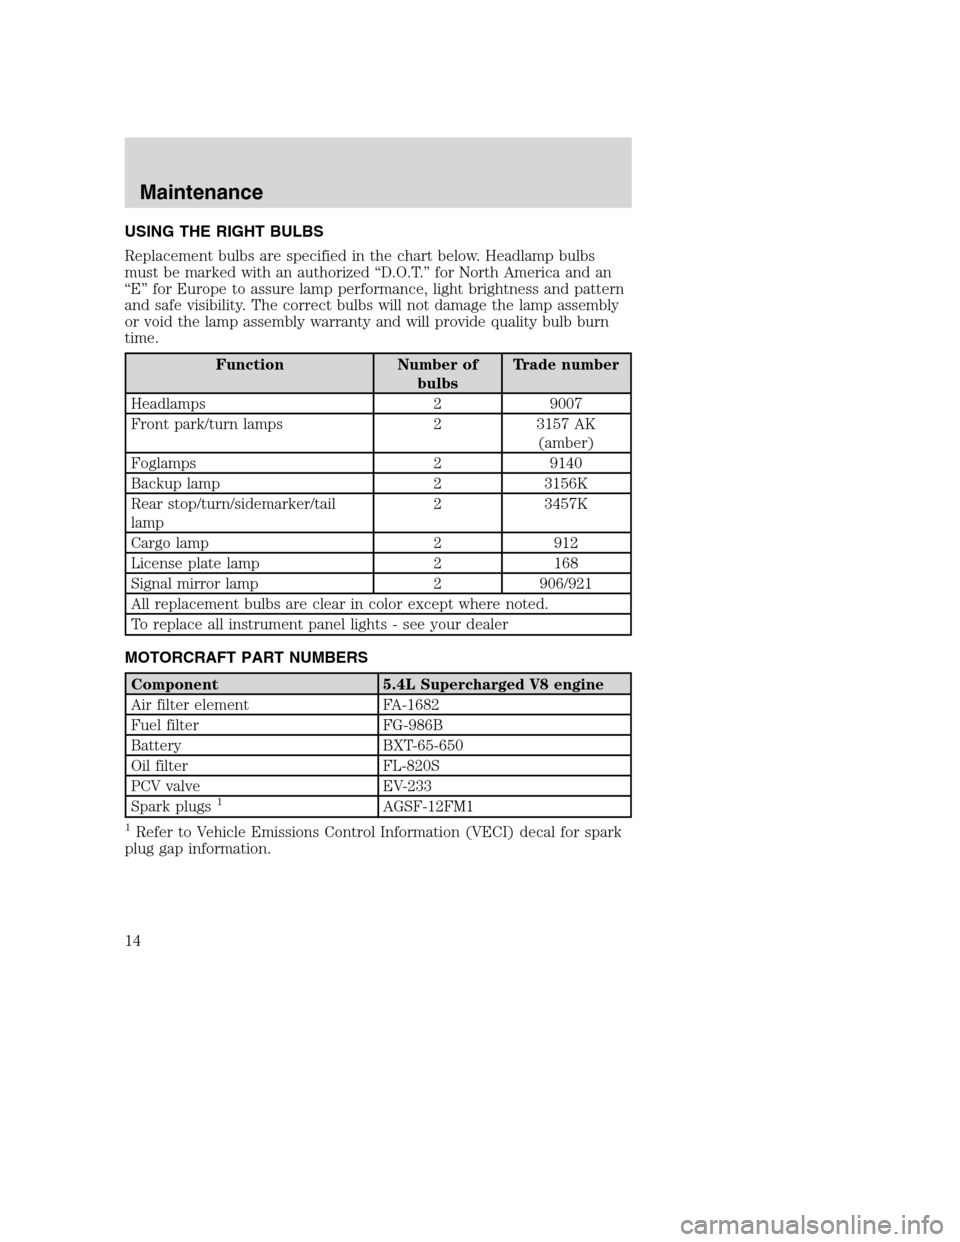 FORD F150 2004 11.G Raptor Supplement Manual USING THE RIGHT BULBS
Replacement bulbs are specified in the chart below. Headlamp bulbs
must be marked with an authorized“D.O.T.”for North America and an
“E”for Europe to assure lamp performa